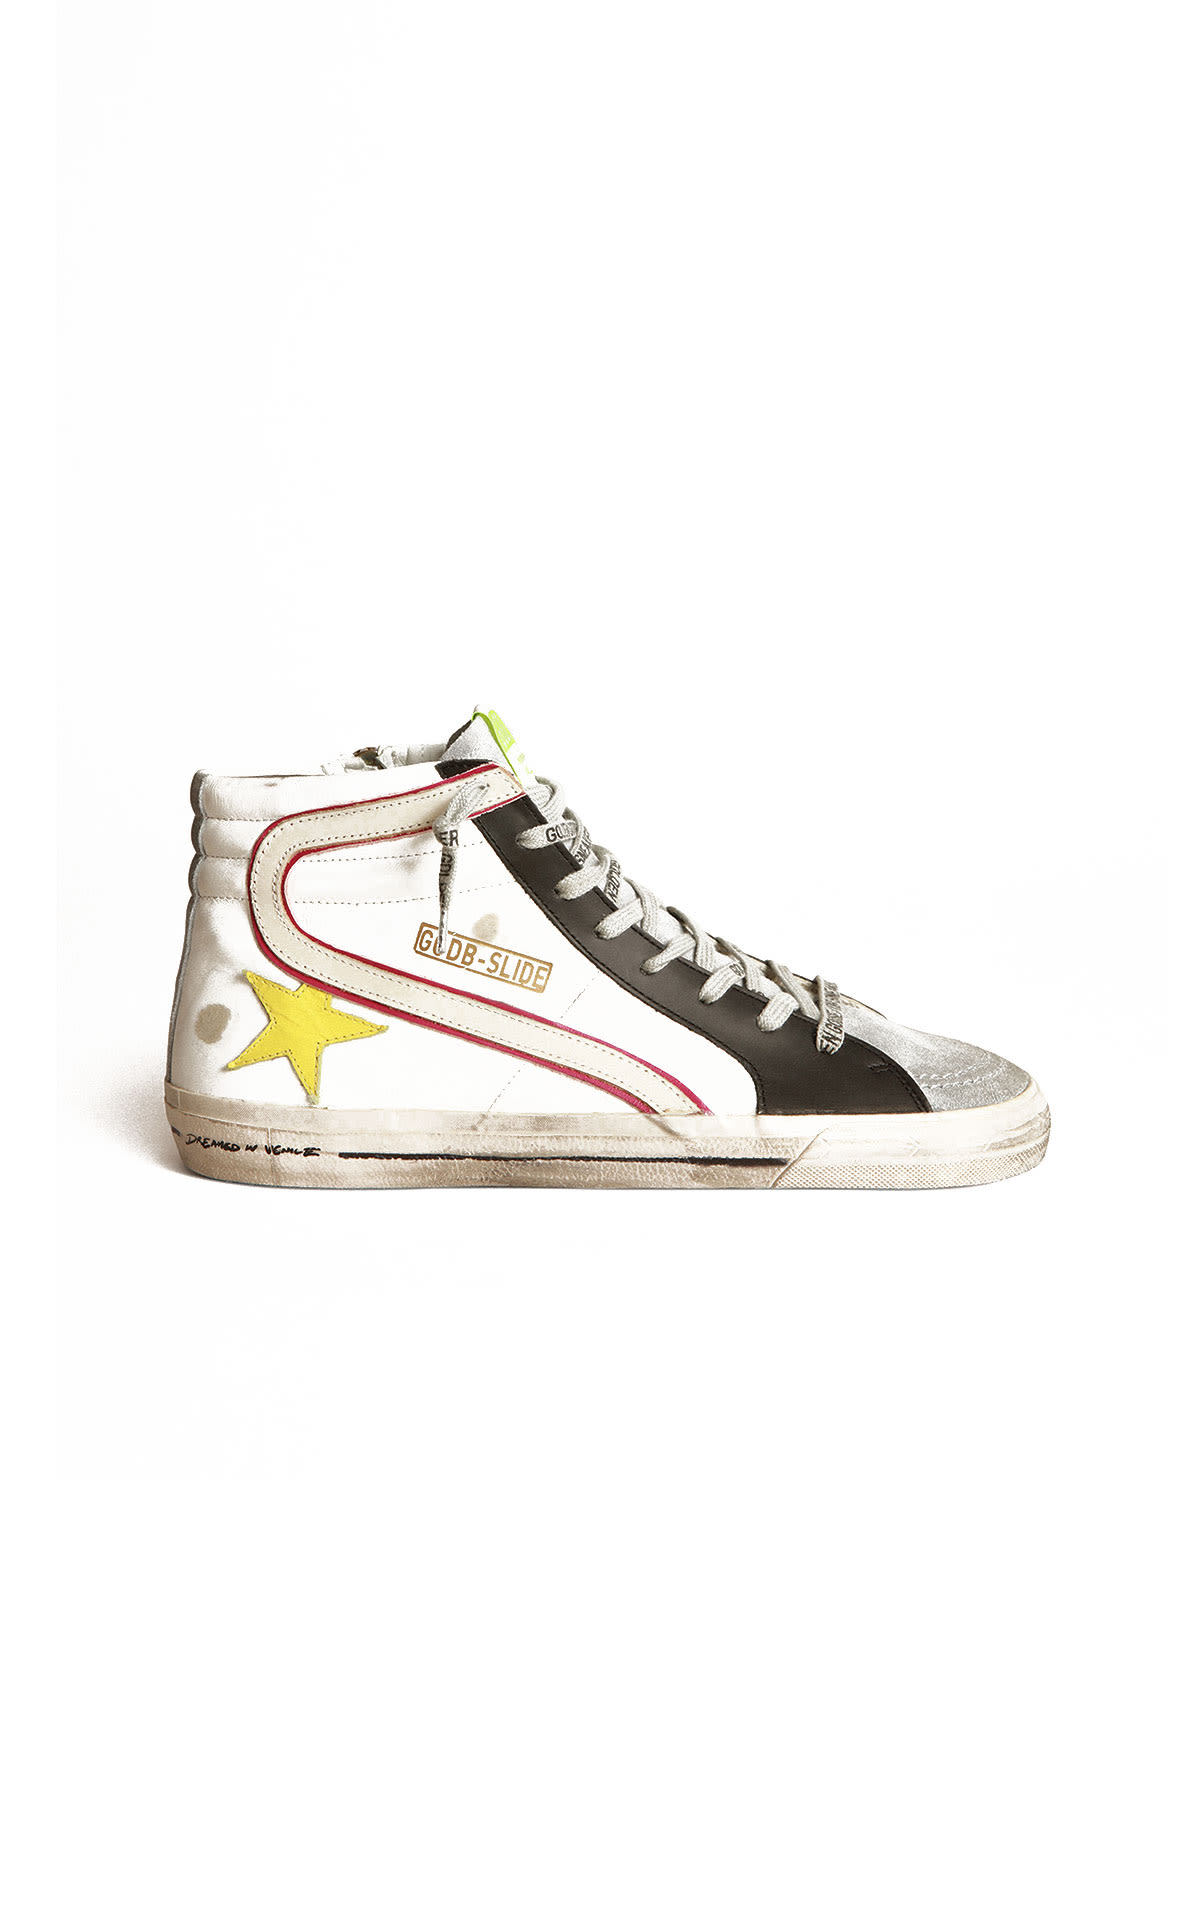 SLIDE LEATHER UPPER STAR AND WAVE SUEDE TOE AND LIST SIGNATURE FOXING golden goose